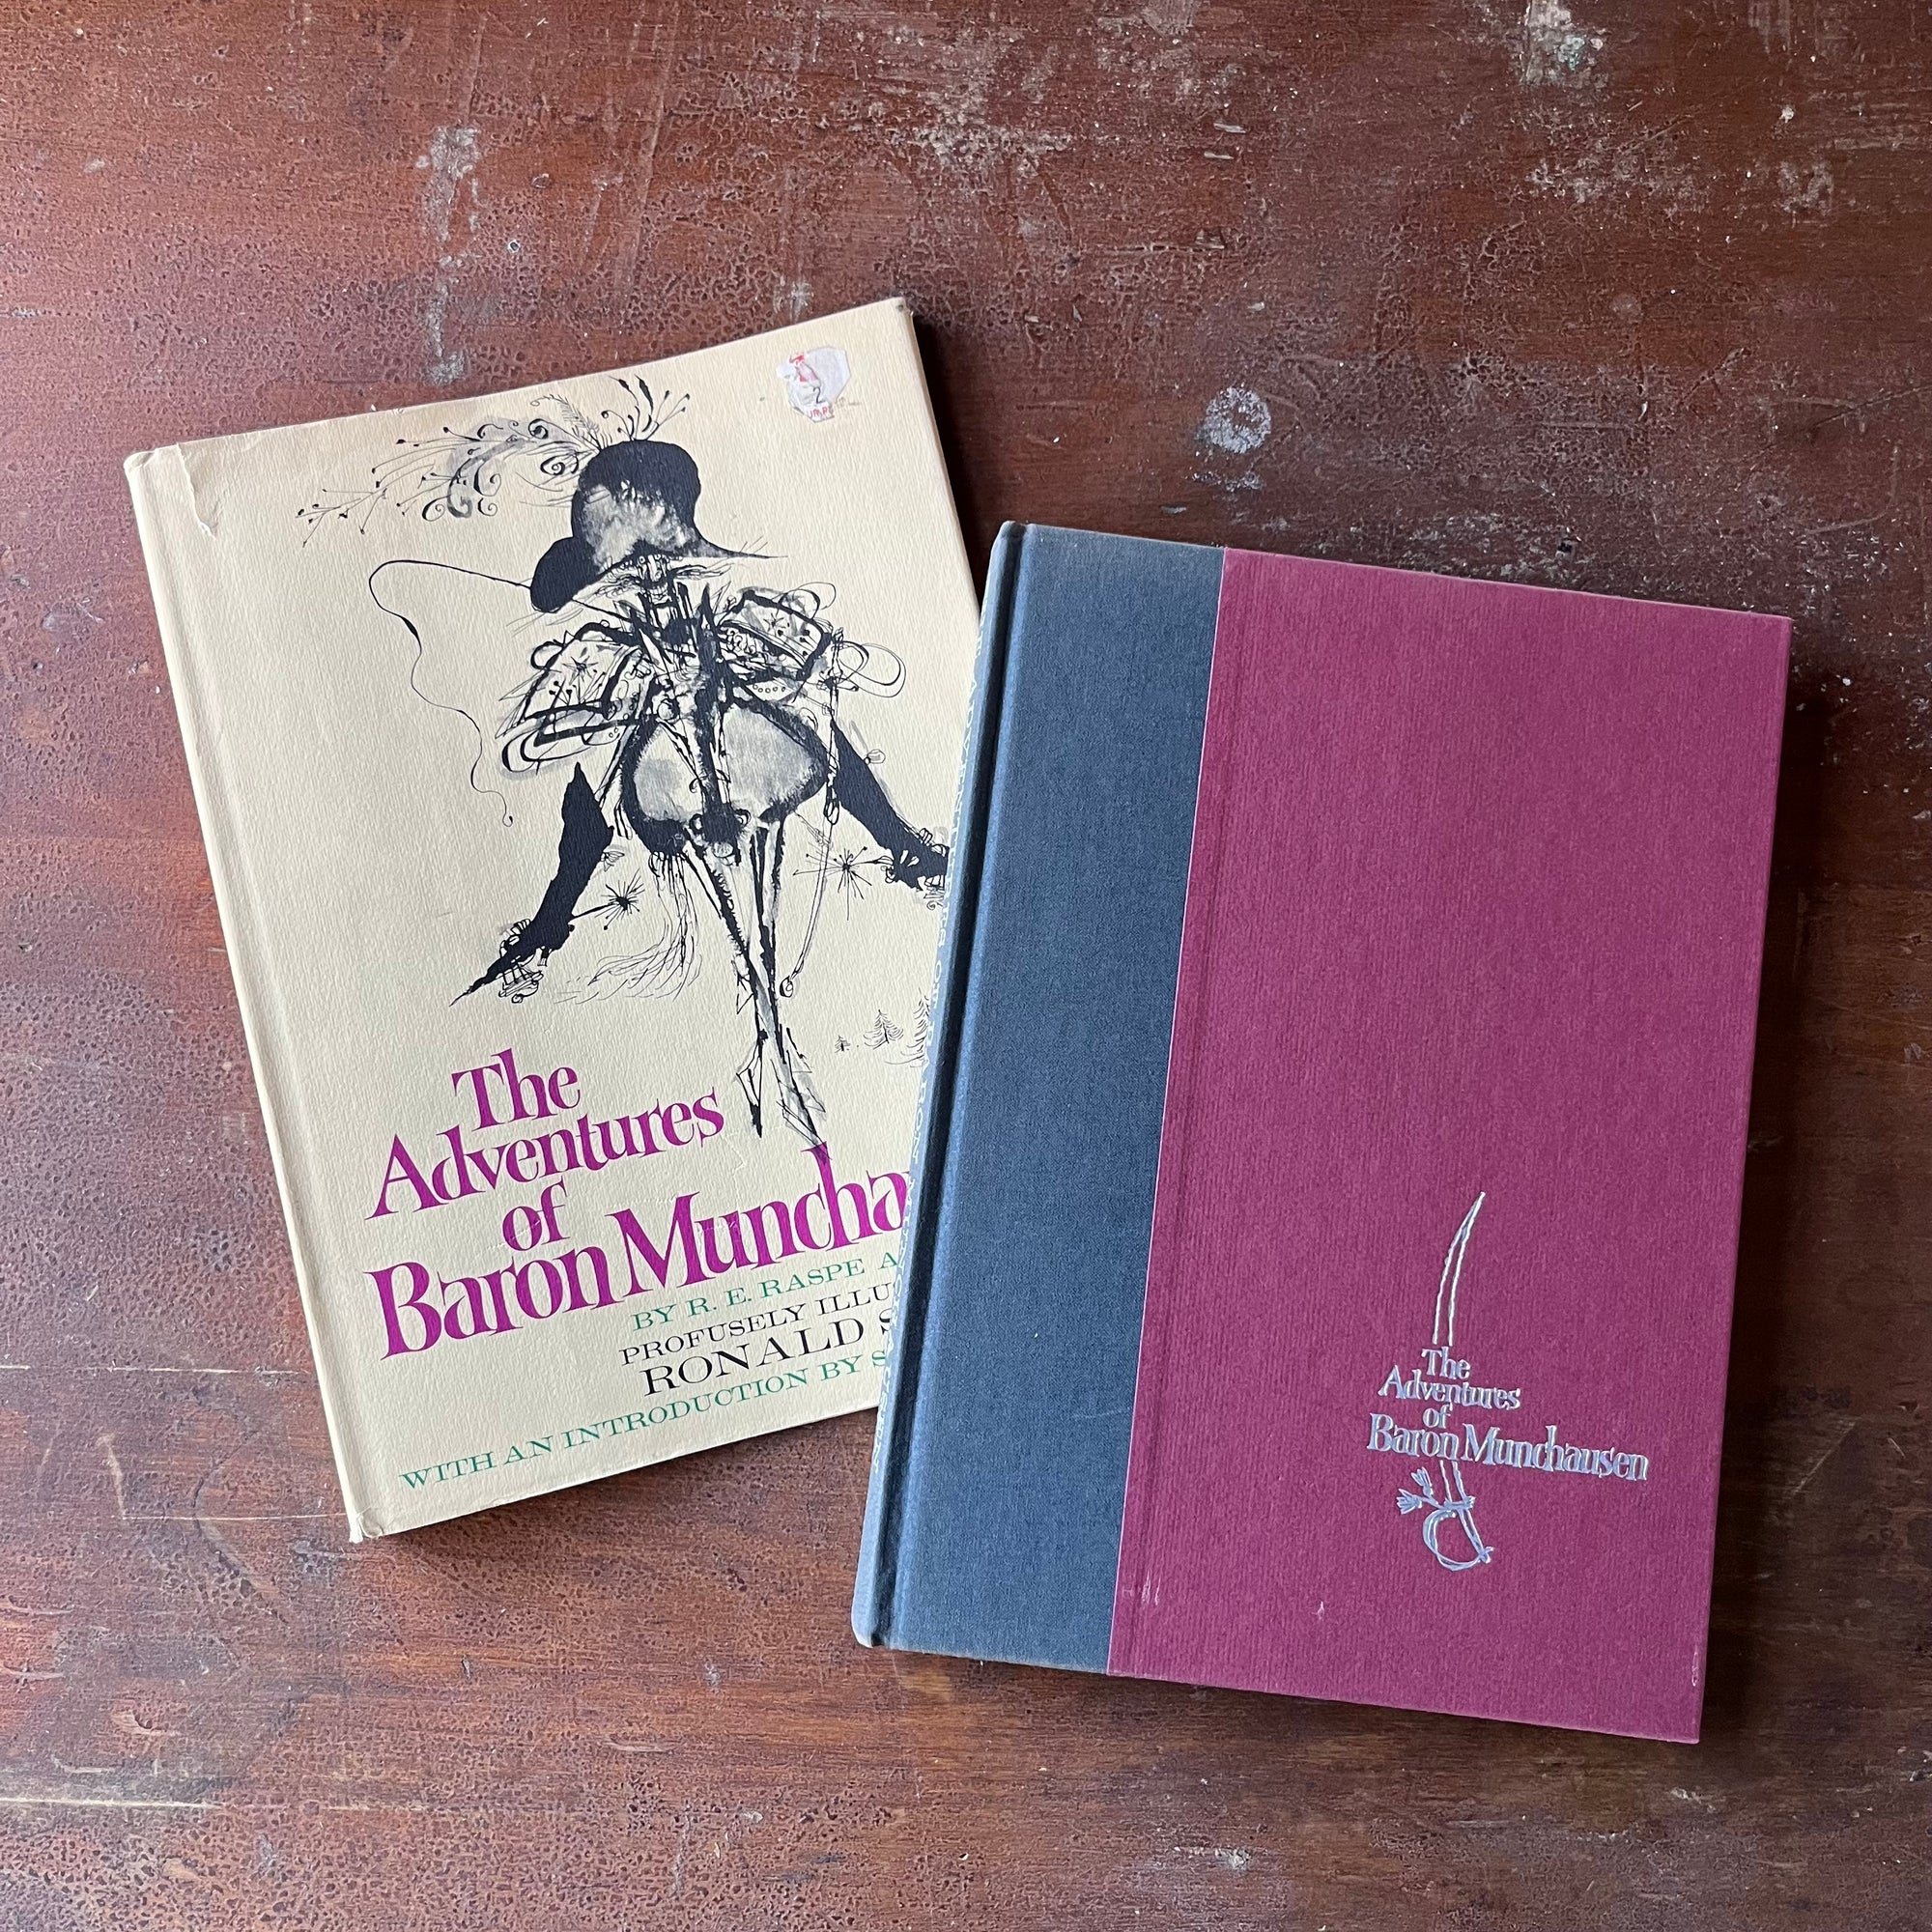 The Adventures of Baron Munchausen by R. E. Raspe with illustrations by Ronald Searle-1969 Edition-Vintage Fantasy--view of the embossed front cover with dust jacket